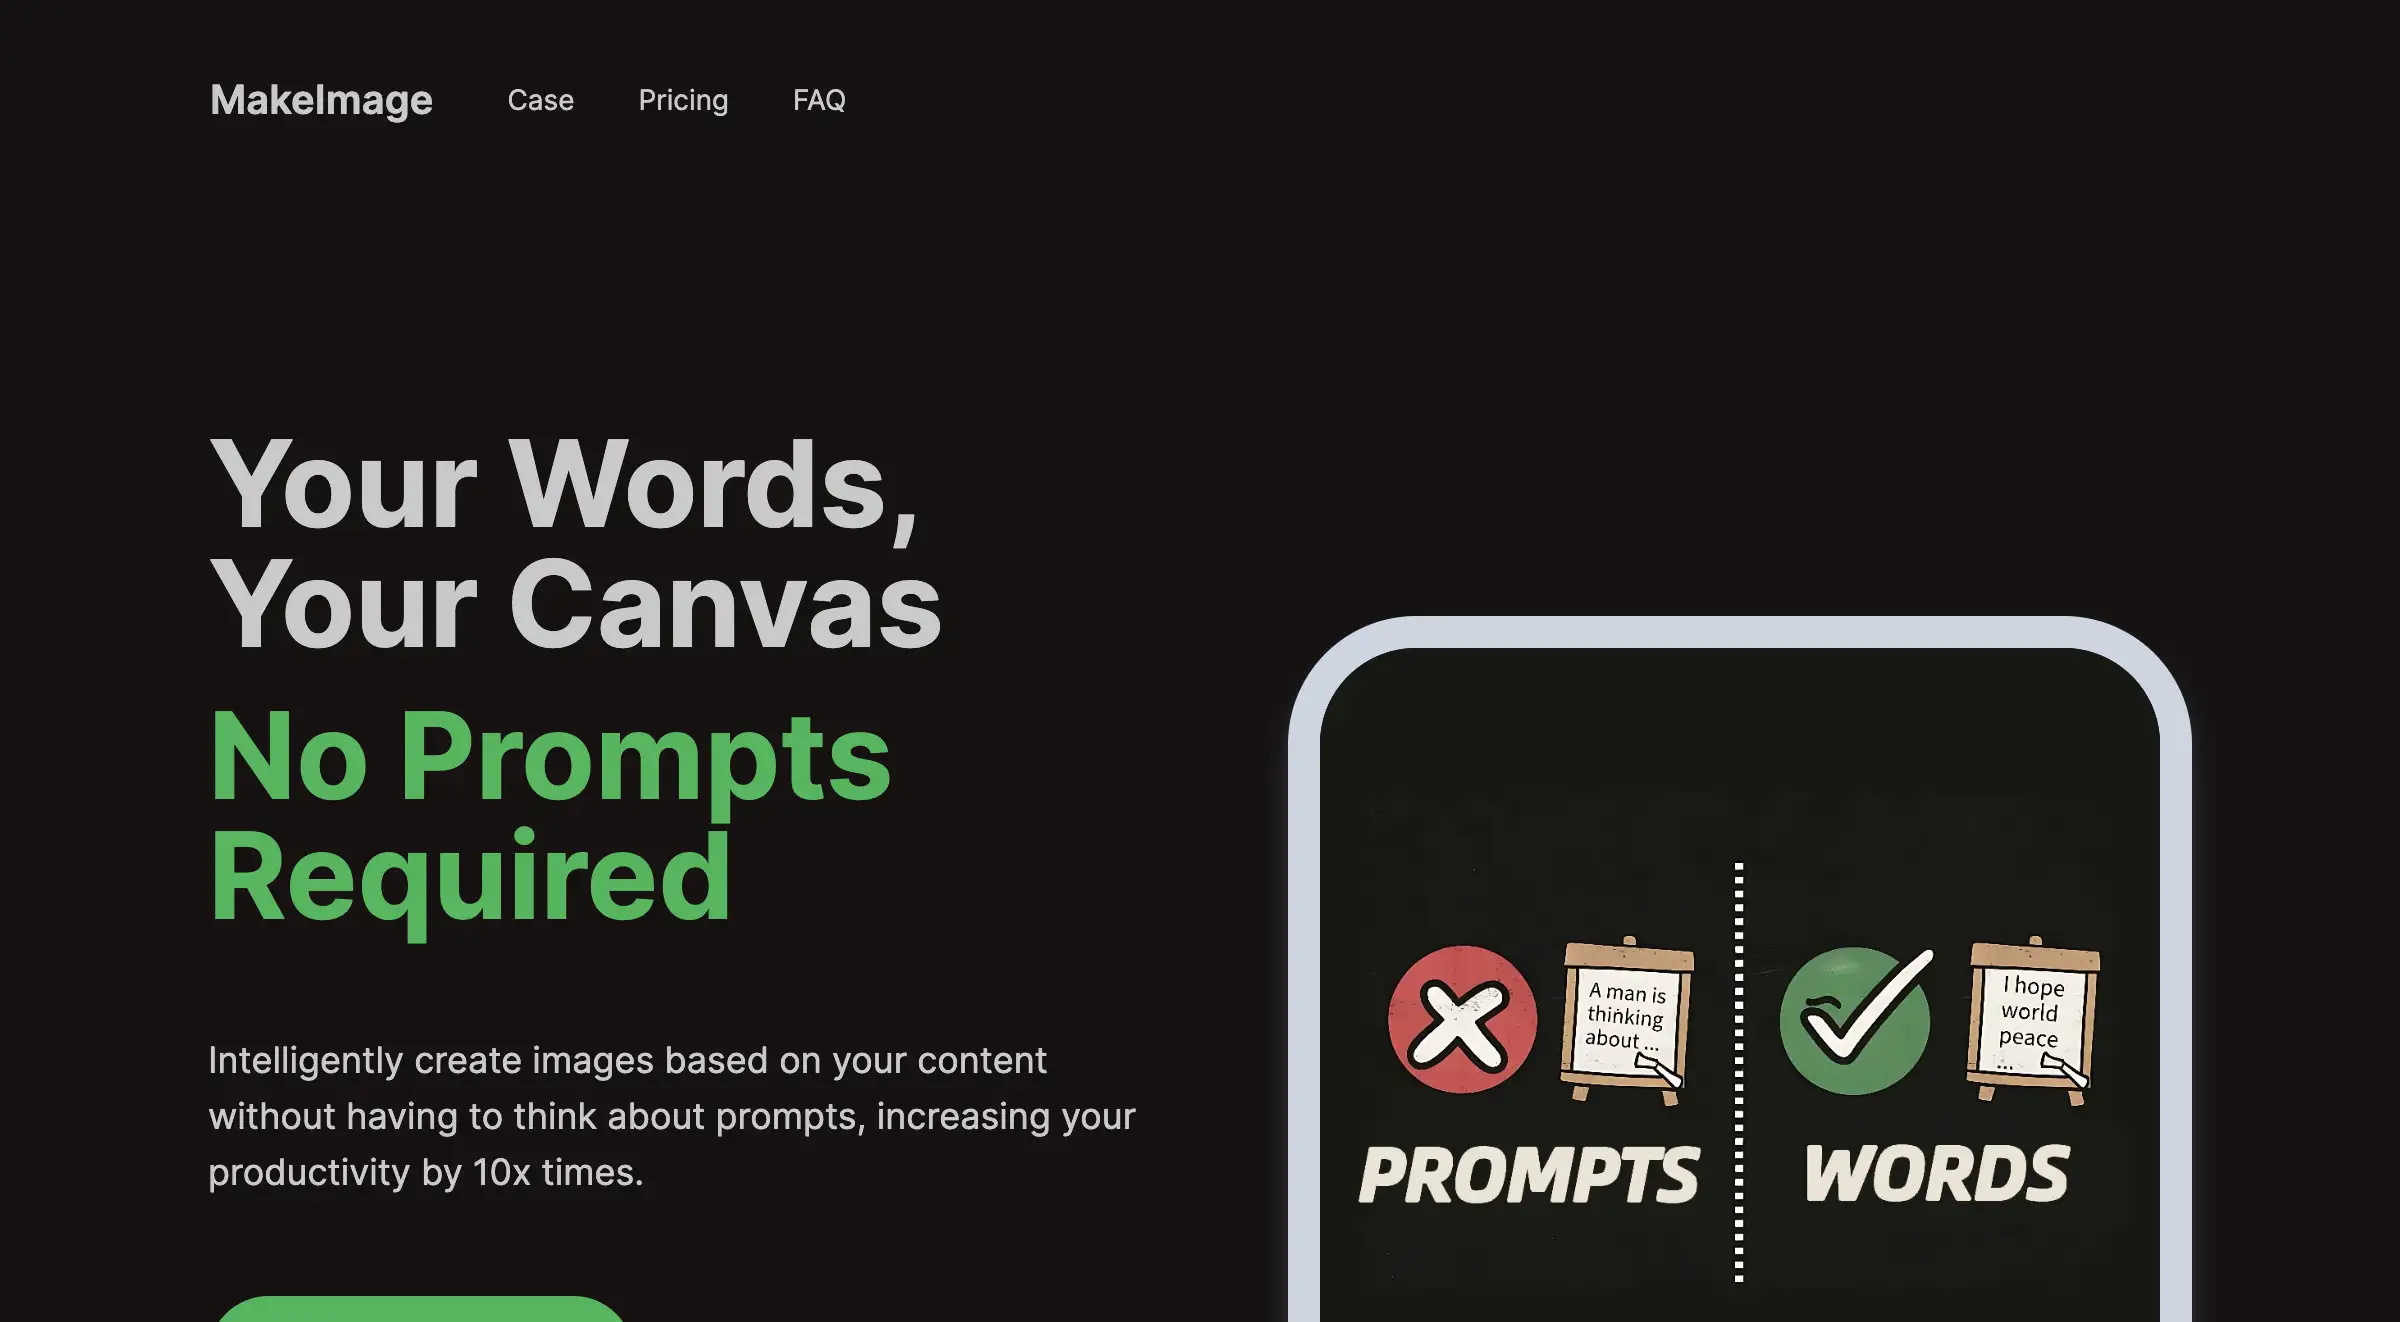 MakeImage | Your Words, Your Canvas